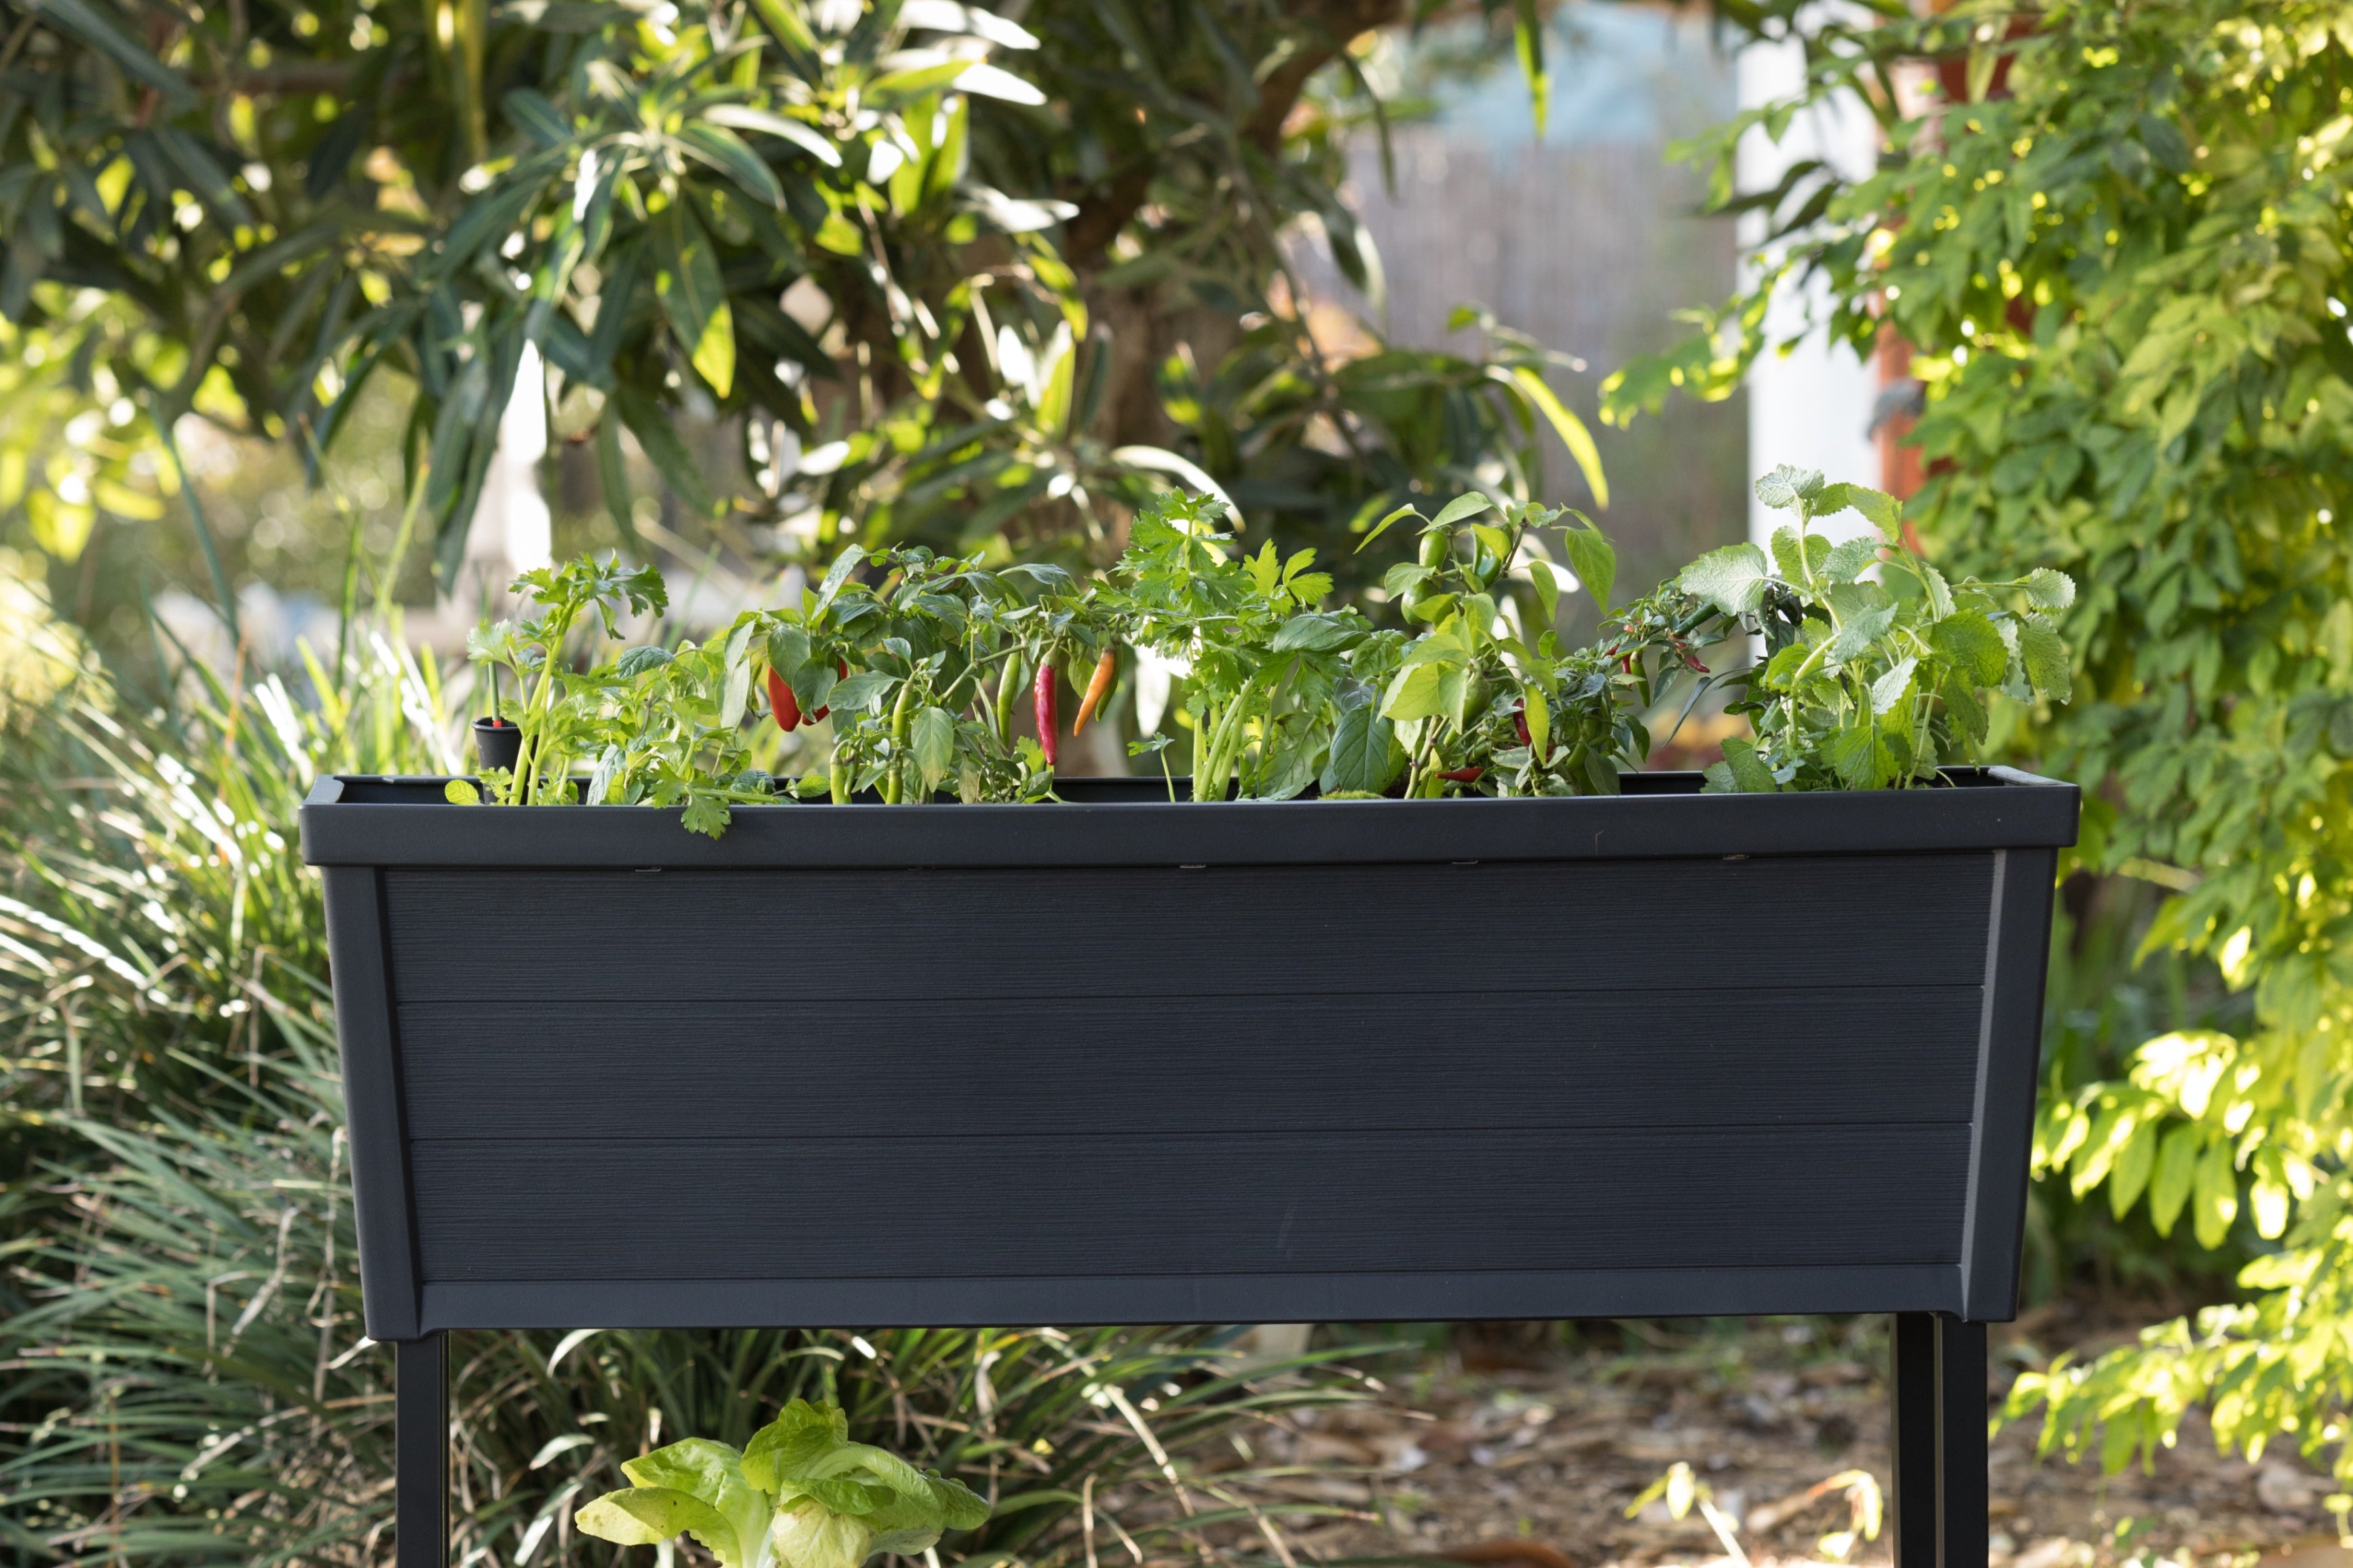 Raised garden bed for growing chilies